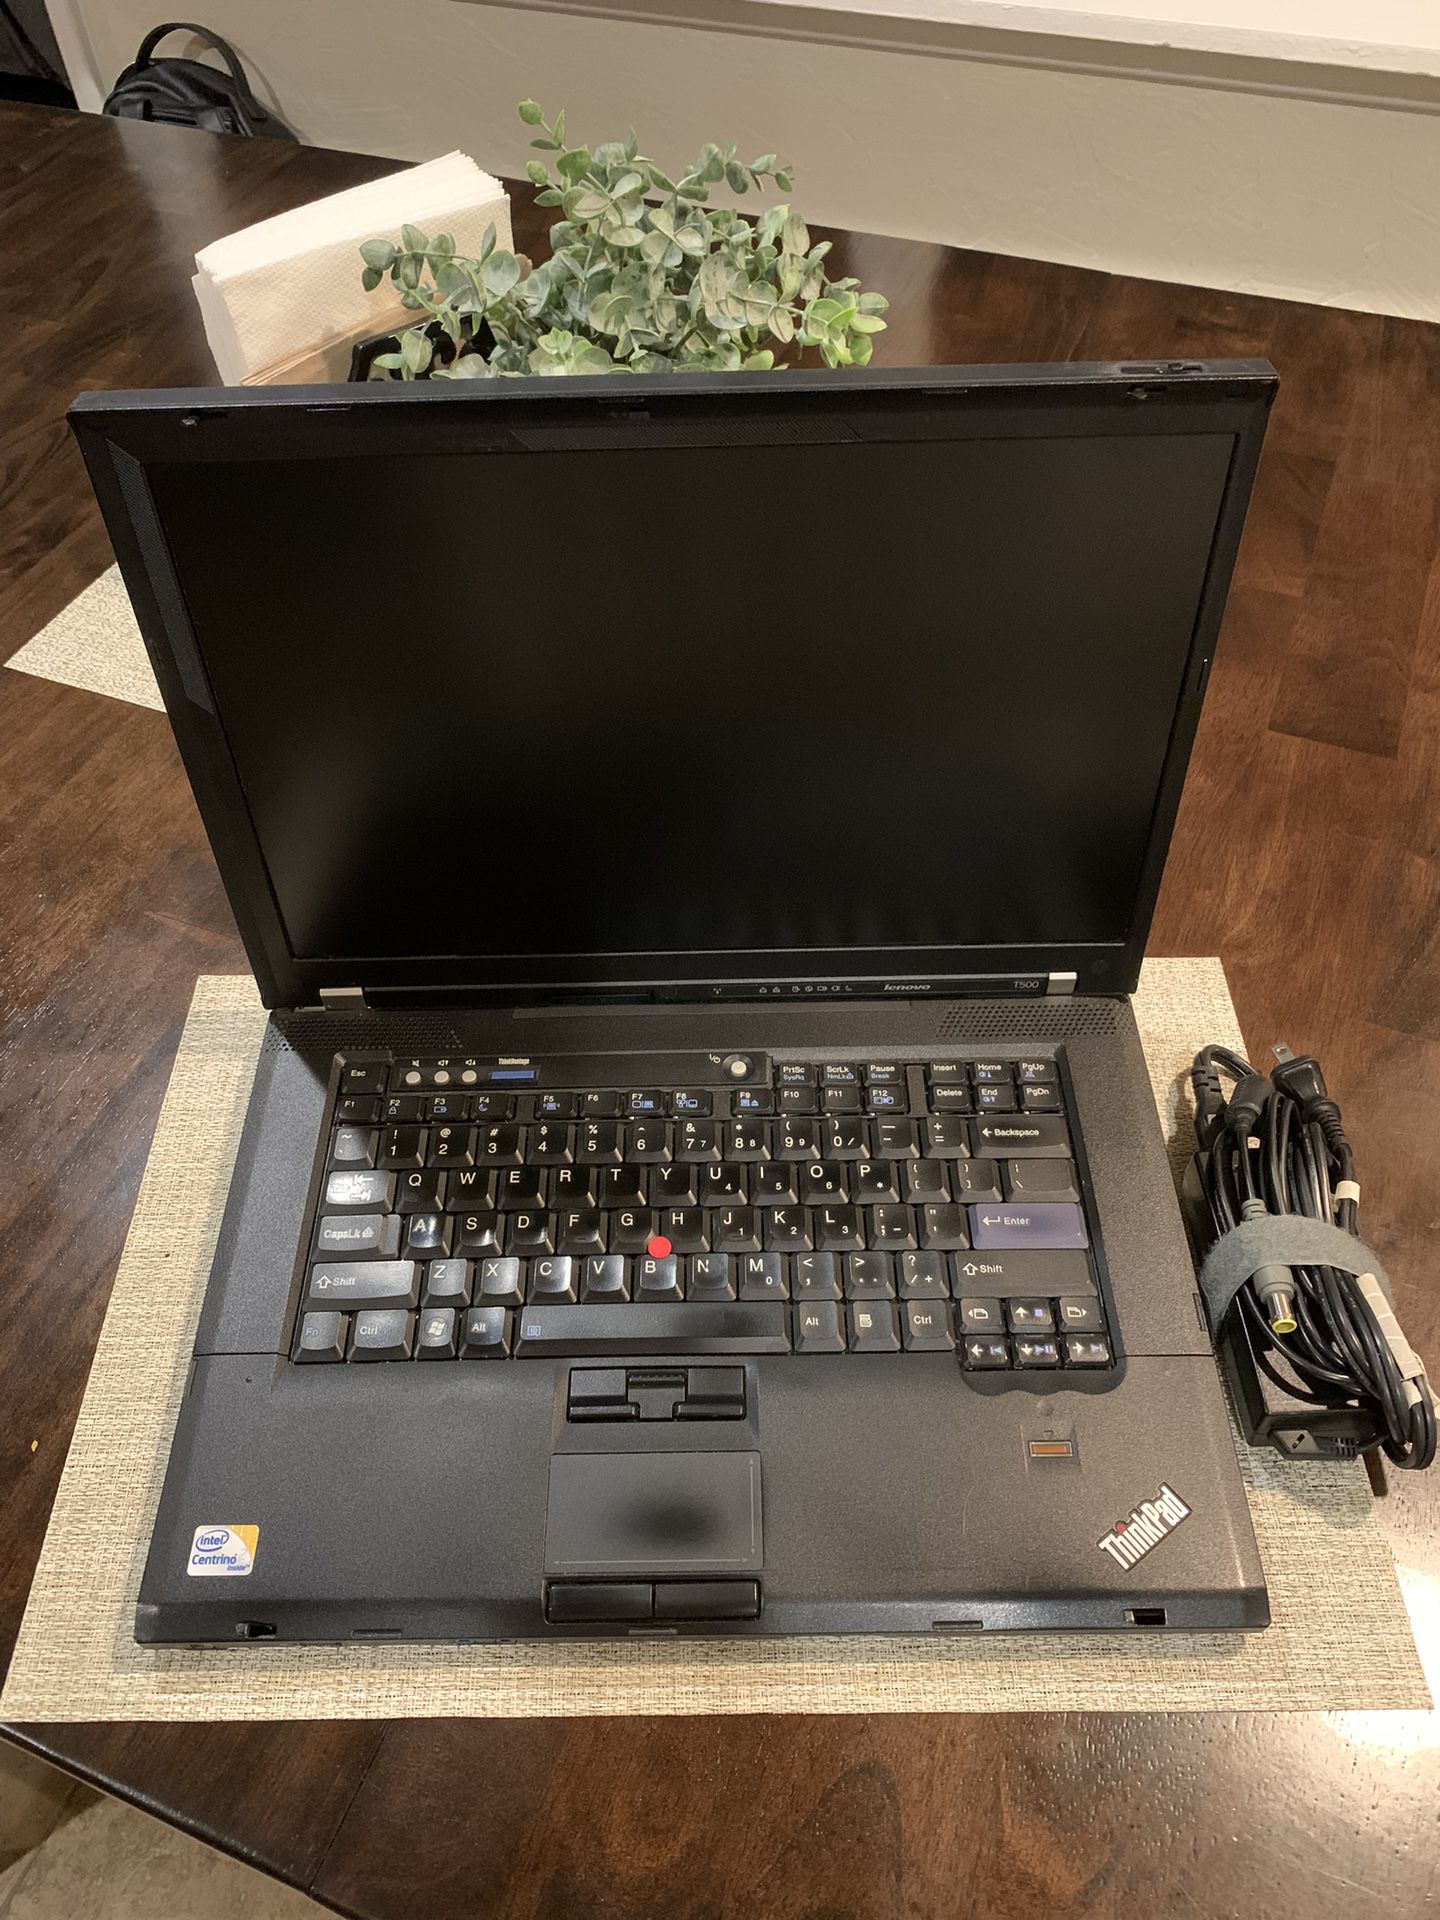 Lenovo T500 15.4 inch Screen with 8GB Ram, DVD Burner, and SSD